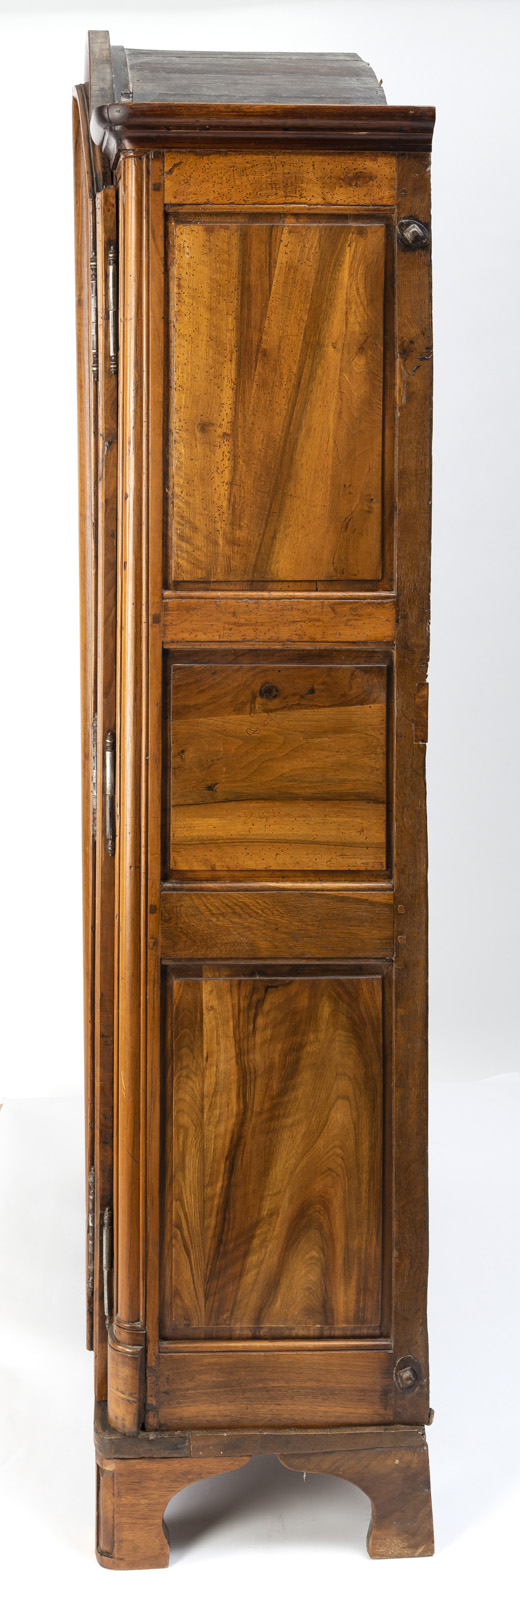 A BAROQUE STYLE "LORRAINE" CUPBOARD - Image 7 of 9